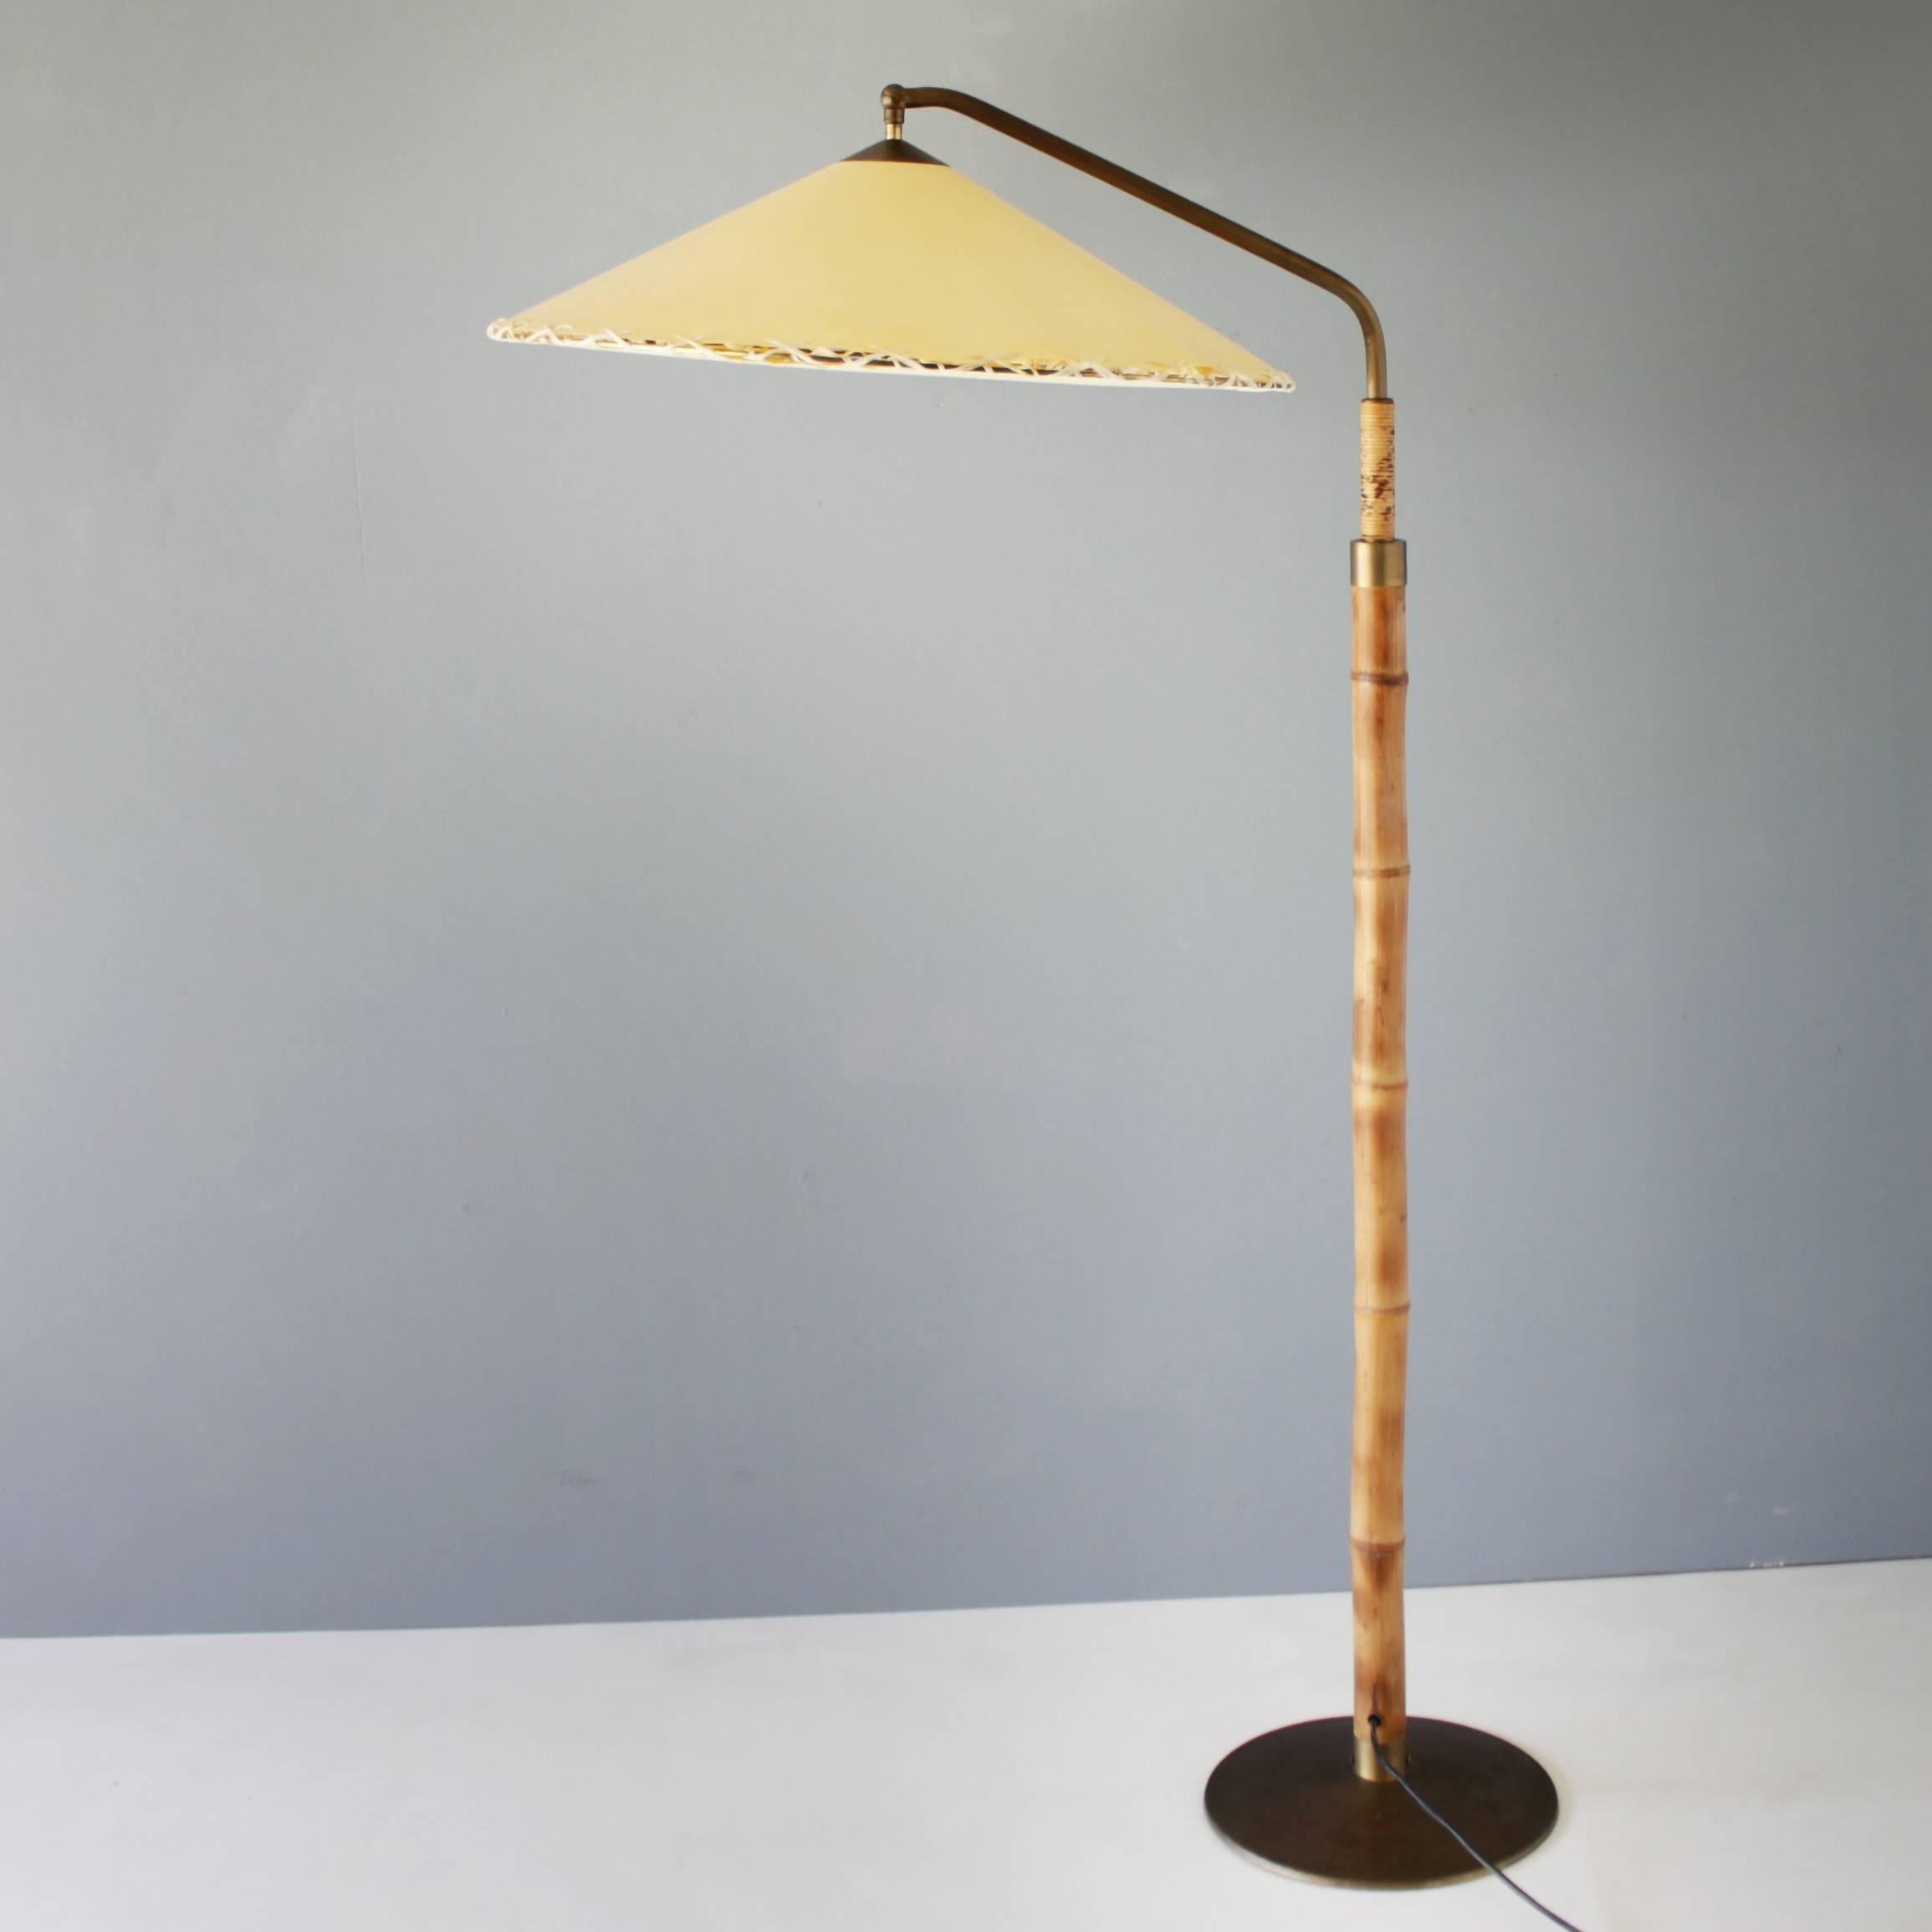 Rare floor lamp by the German designer Pitt Müller. Manufactured by Müller Werkstätten Bonn in the early fifties. Bamboo, brass and with a paper shade. The shade is been restored. Marked with a label. Adjustable in height. Dimensions: Height